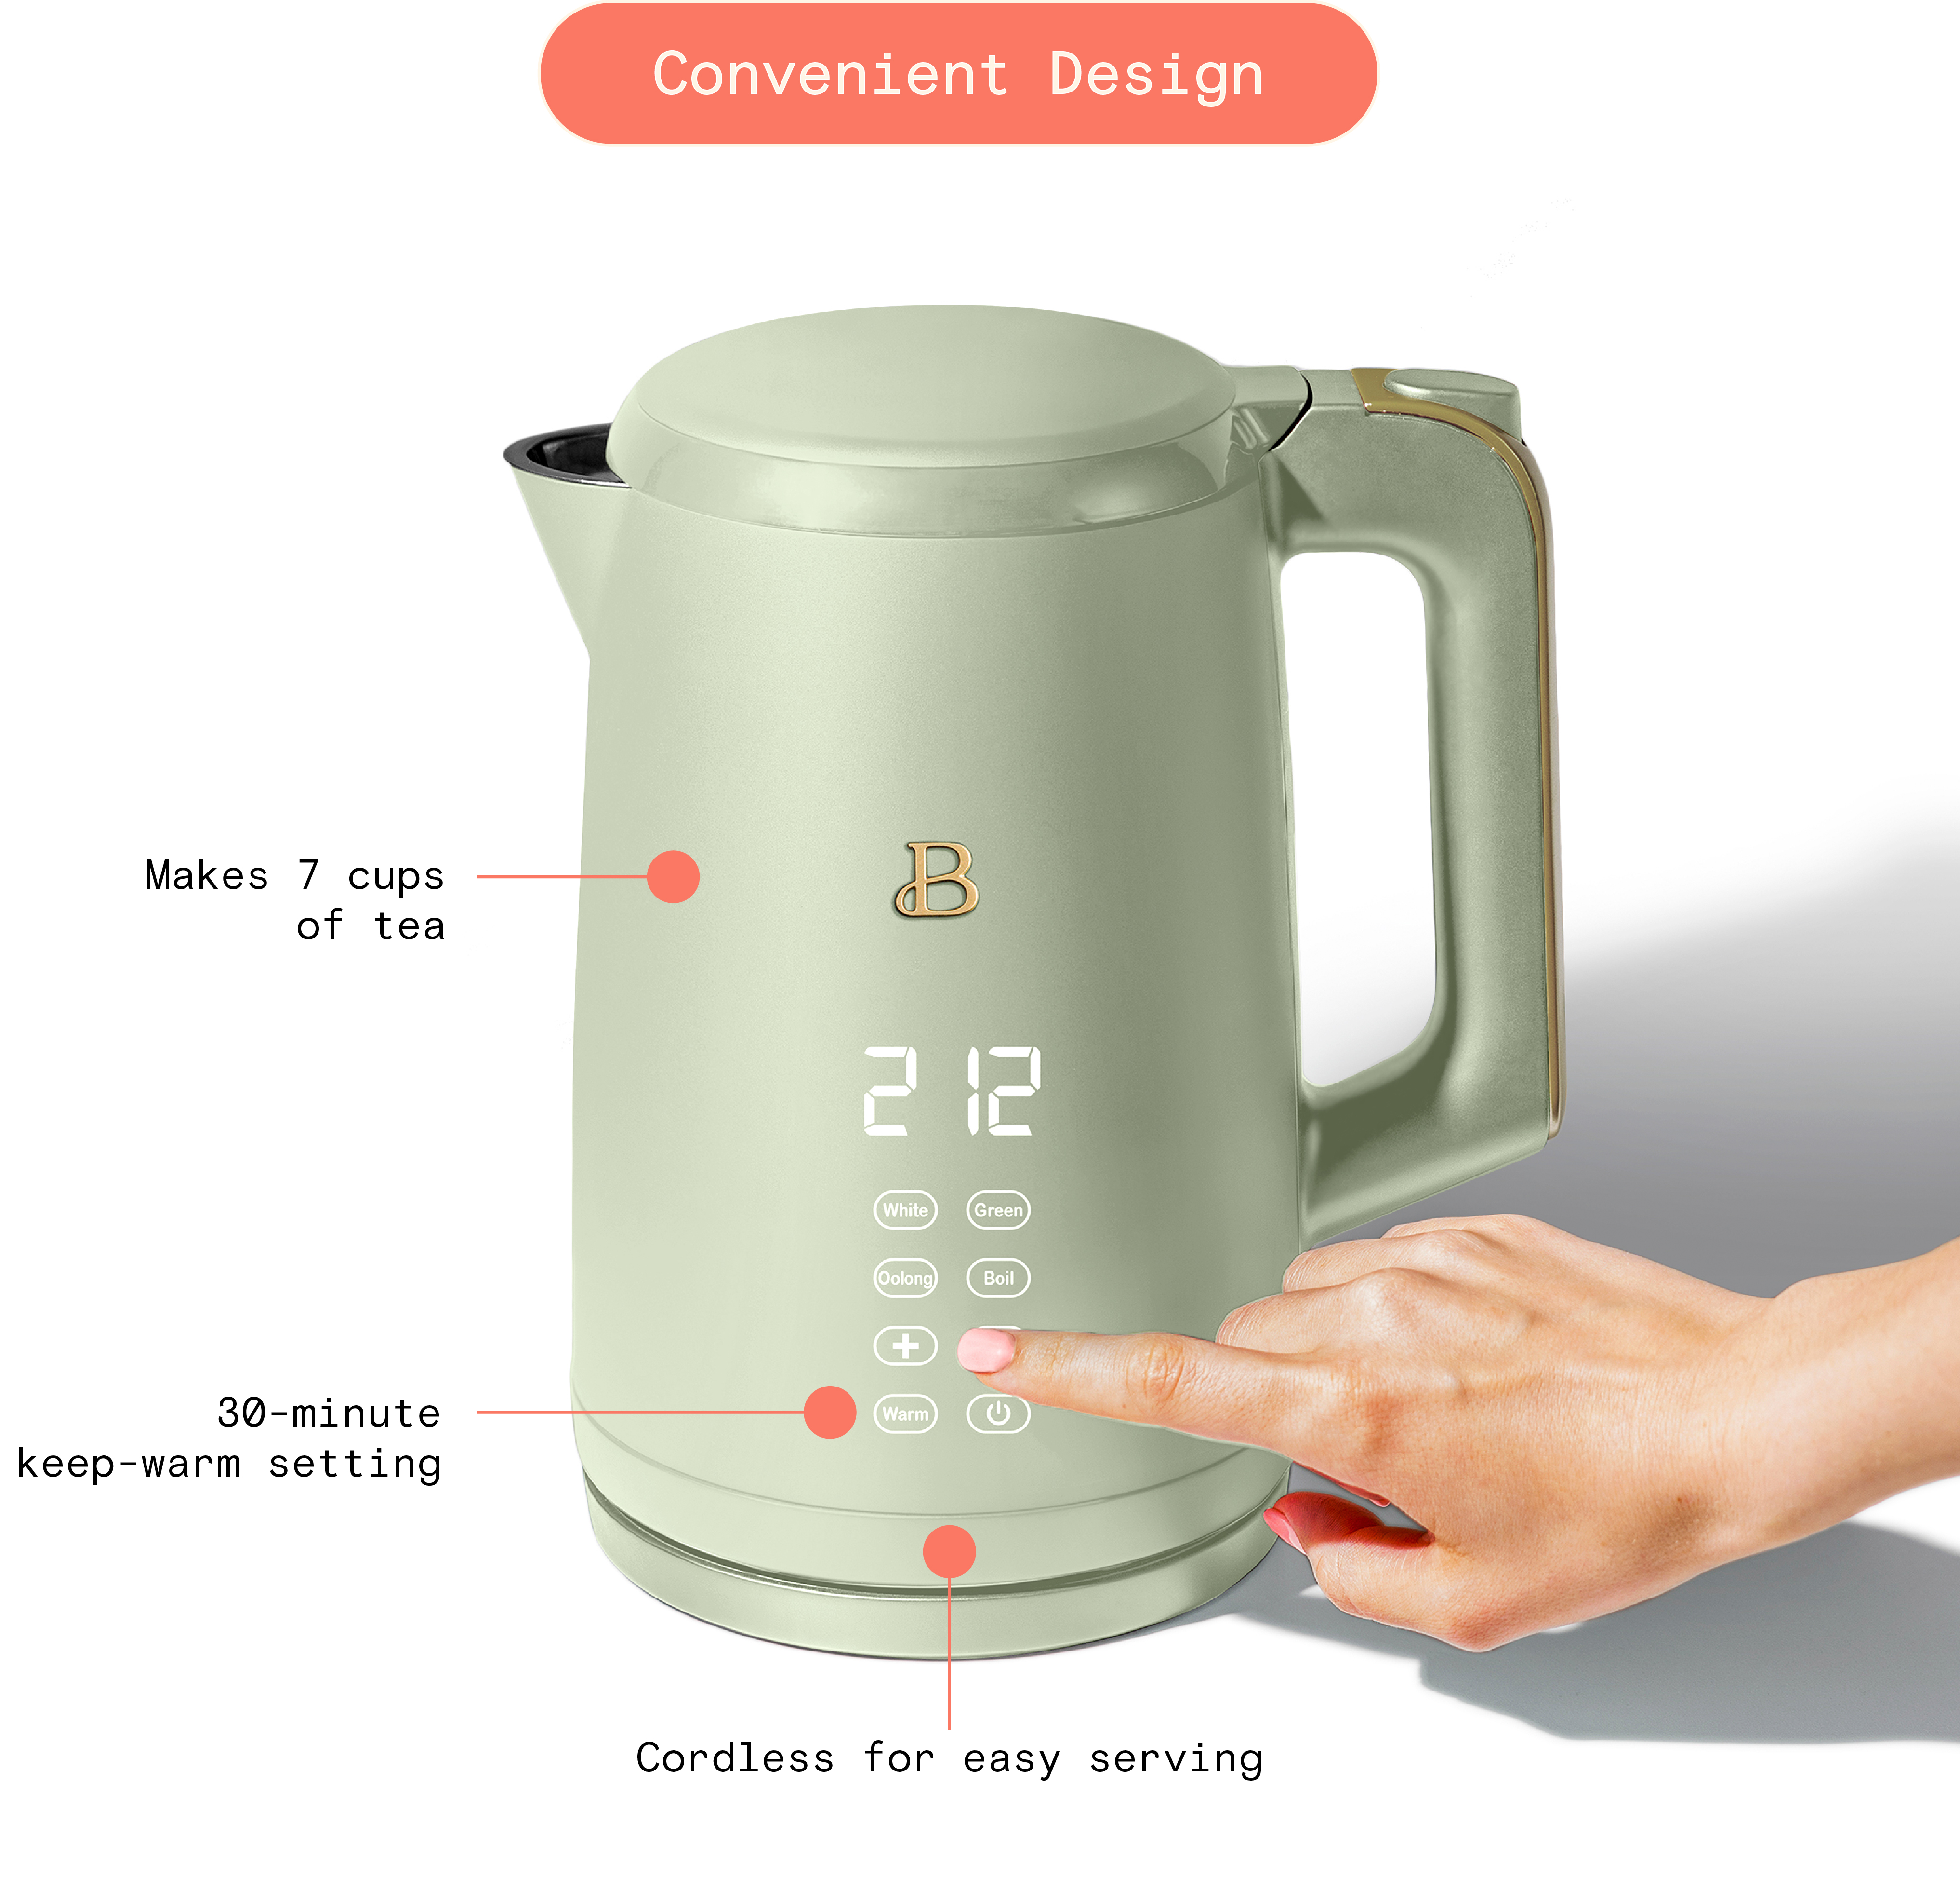 Beautiful 1.7-Liter Electric Kettle 1500 W with One-Touch Activation, Sage Green by Drew Barrymore - image 5 of 8